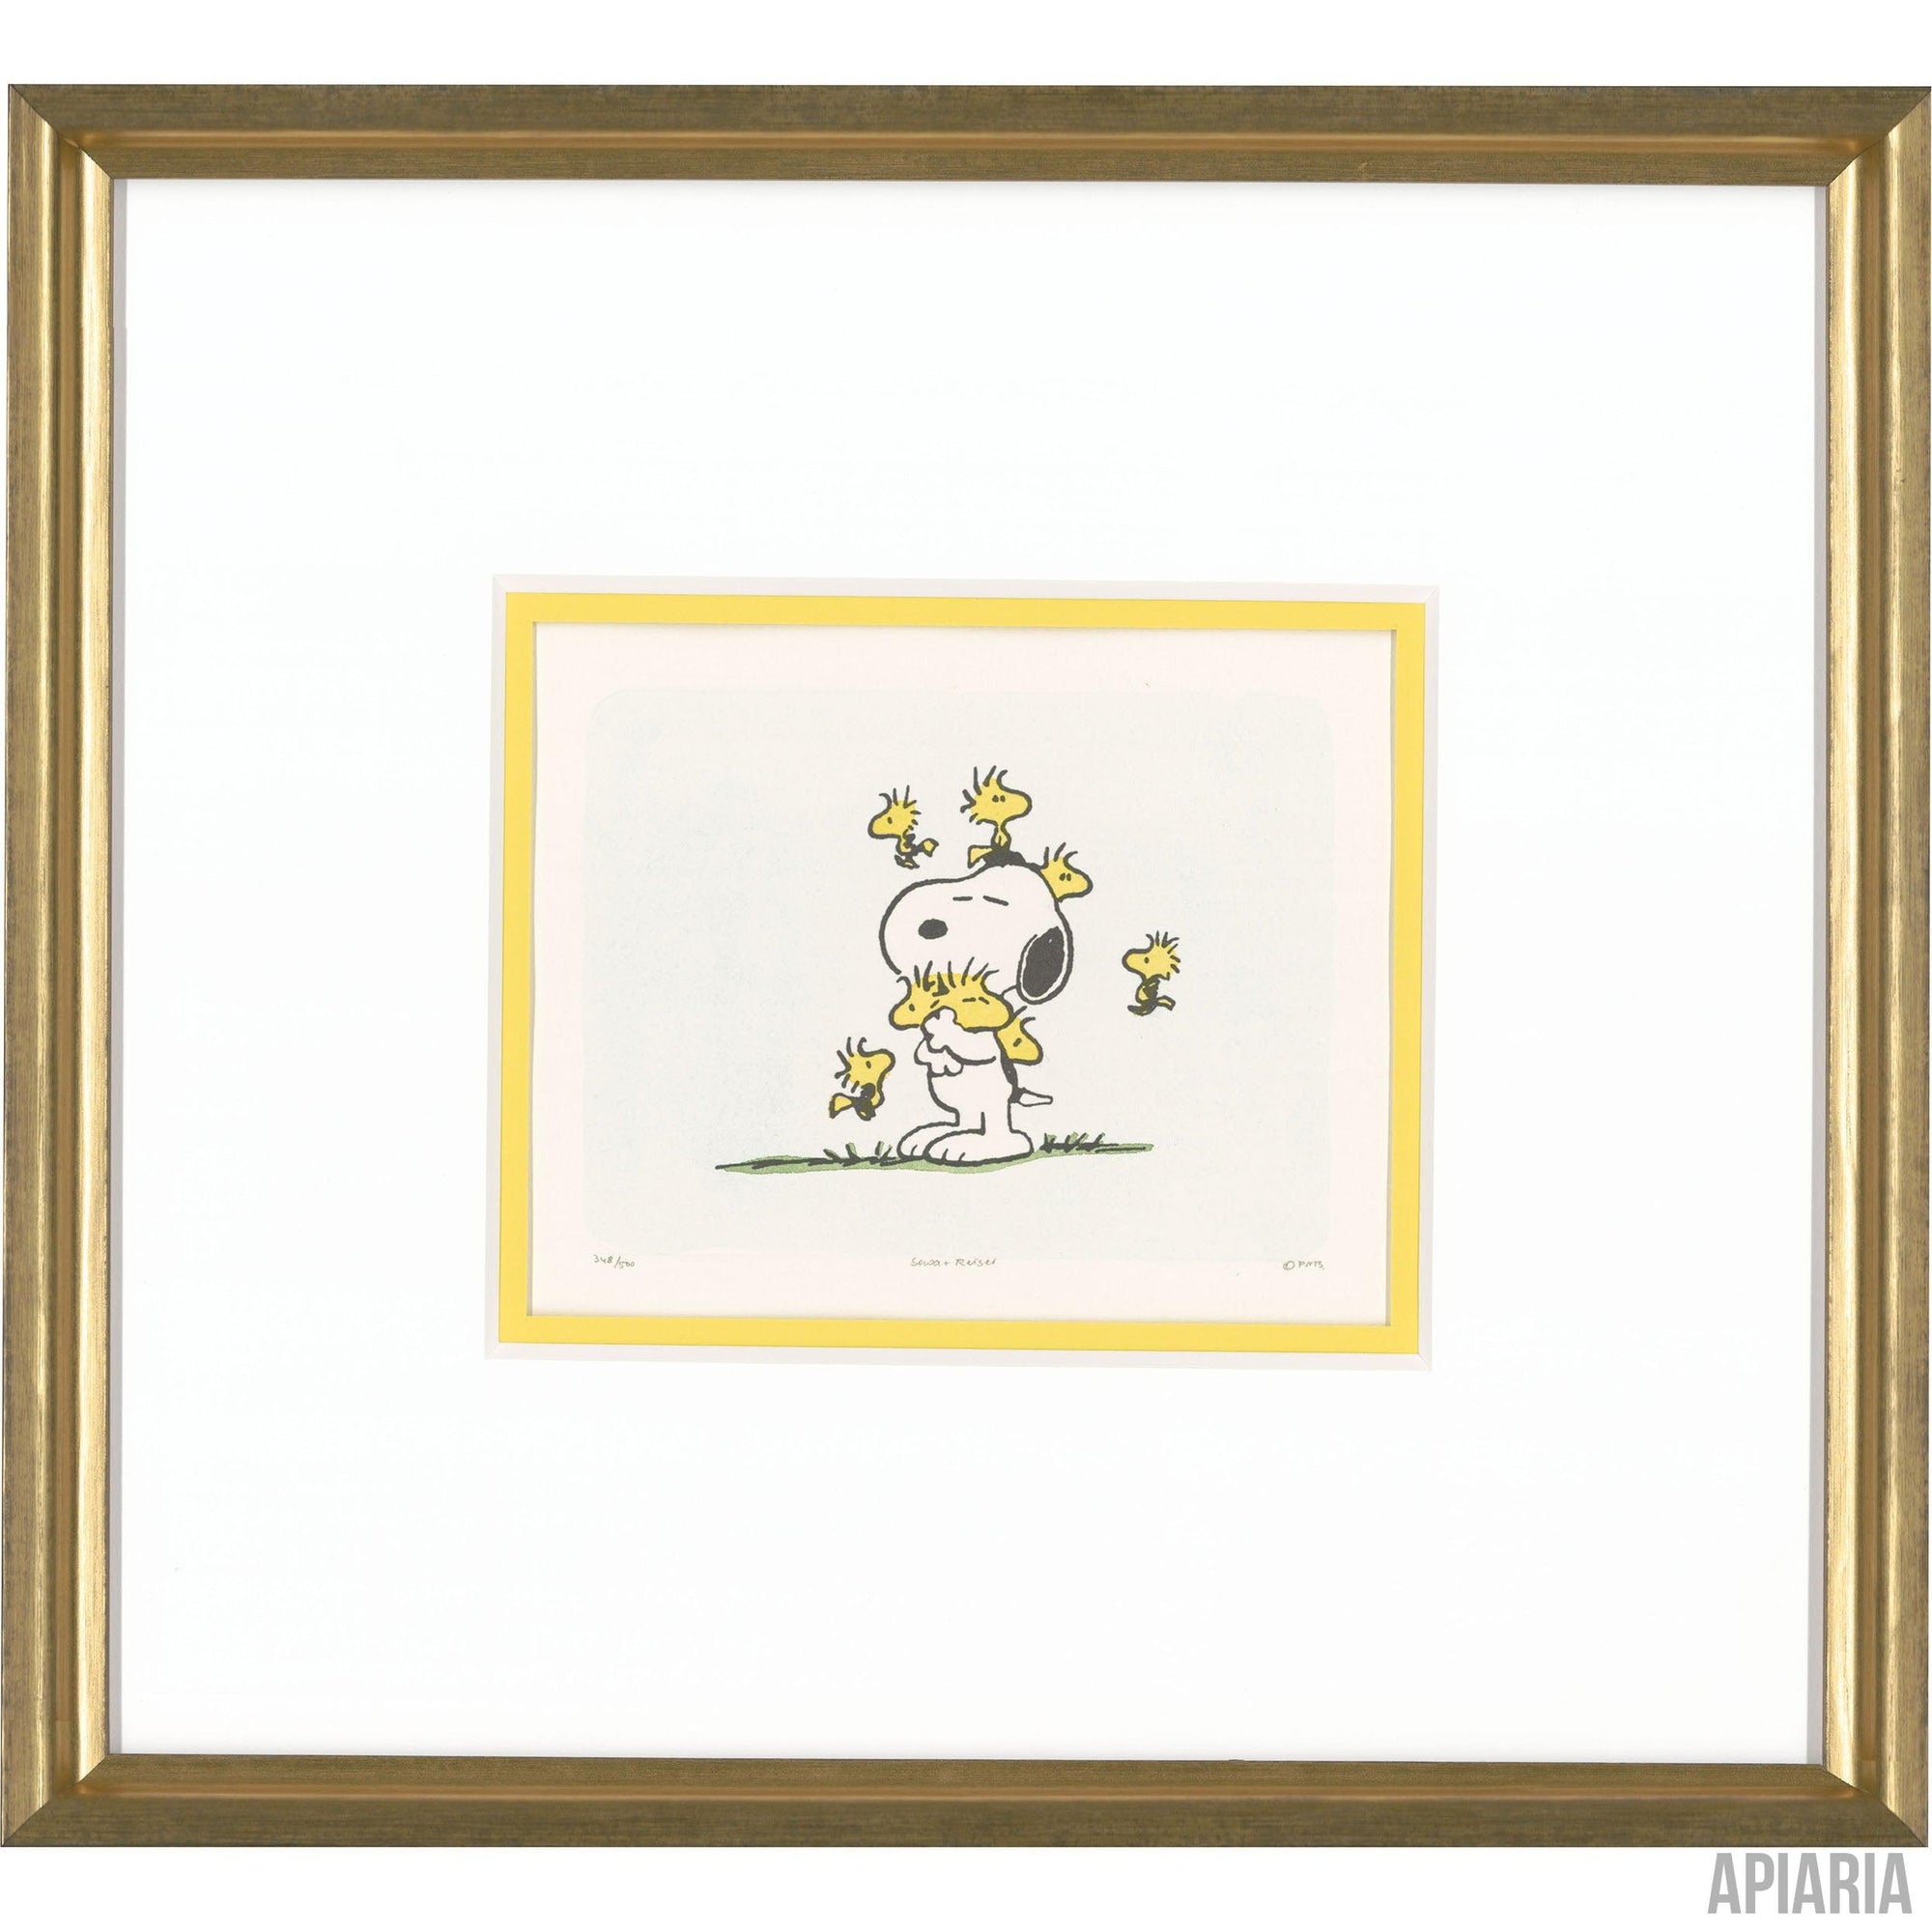 Charles Schulz "Friends"-Framed Art-Apiaria